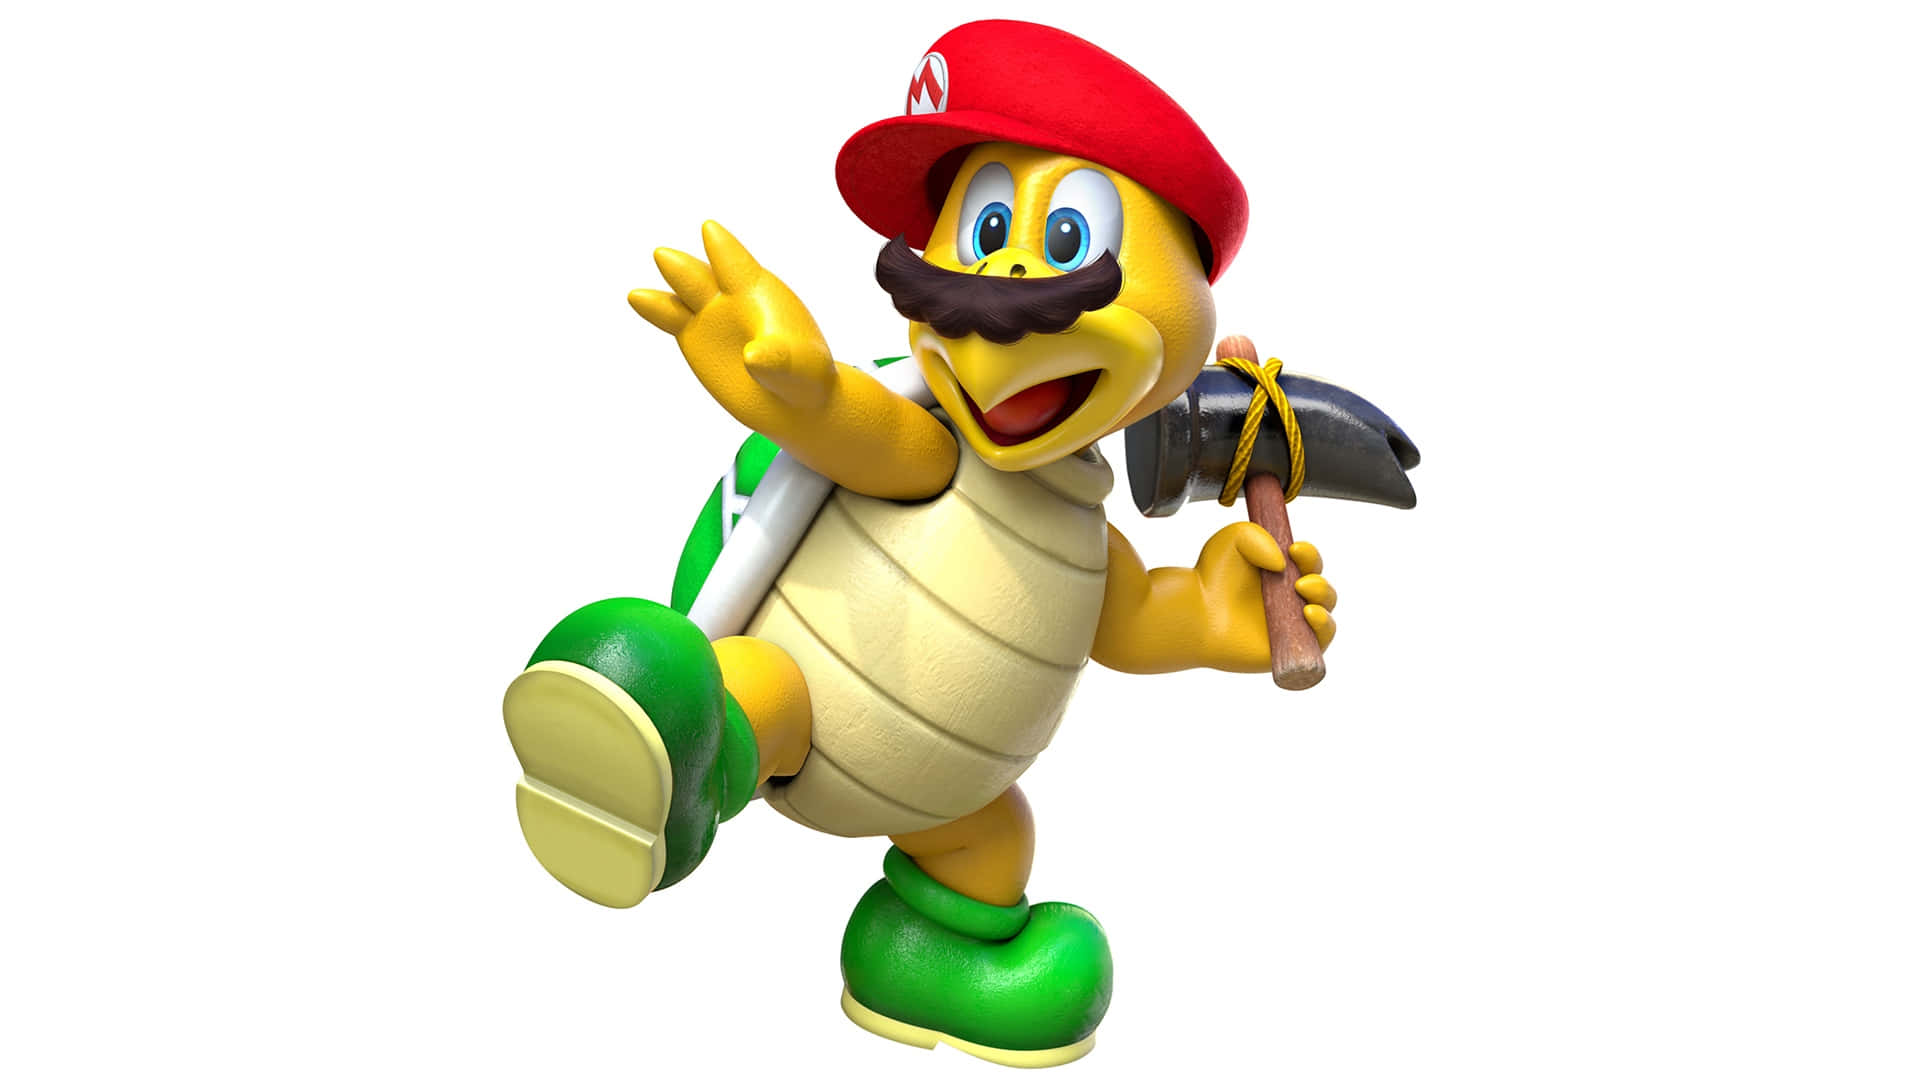 Hammer Bro in action - Attack pose in the Mario Universe Wallpaper